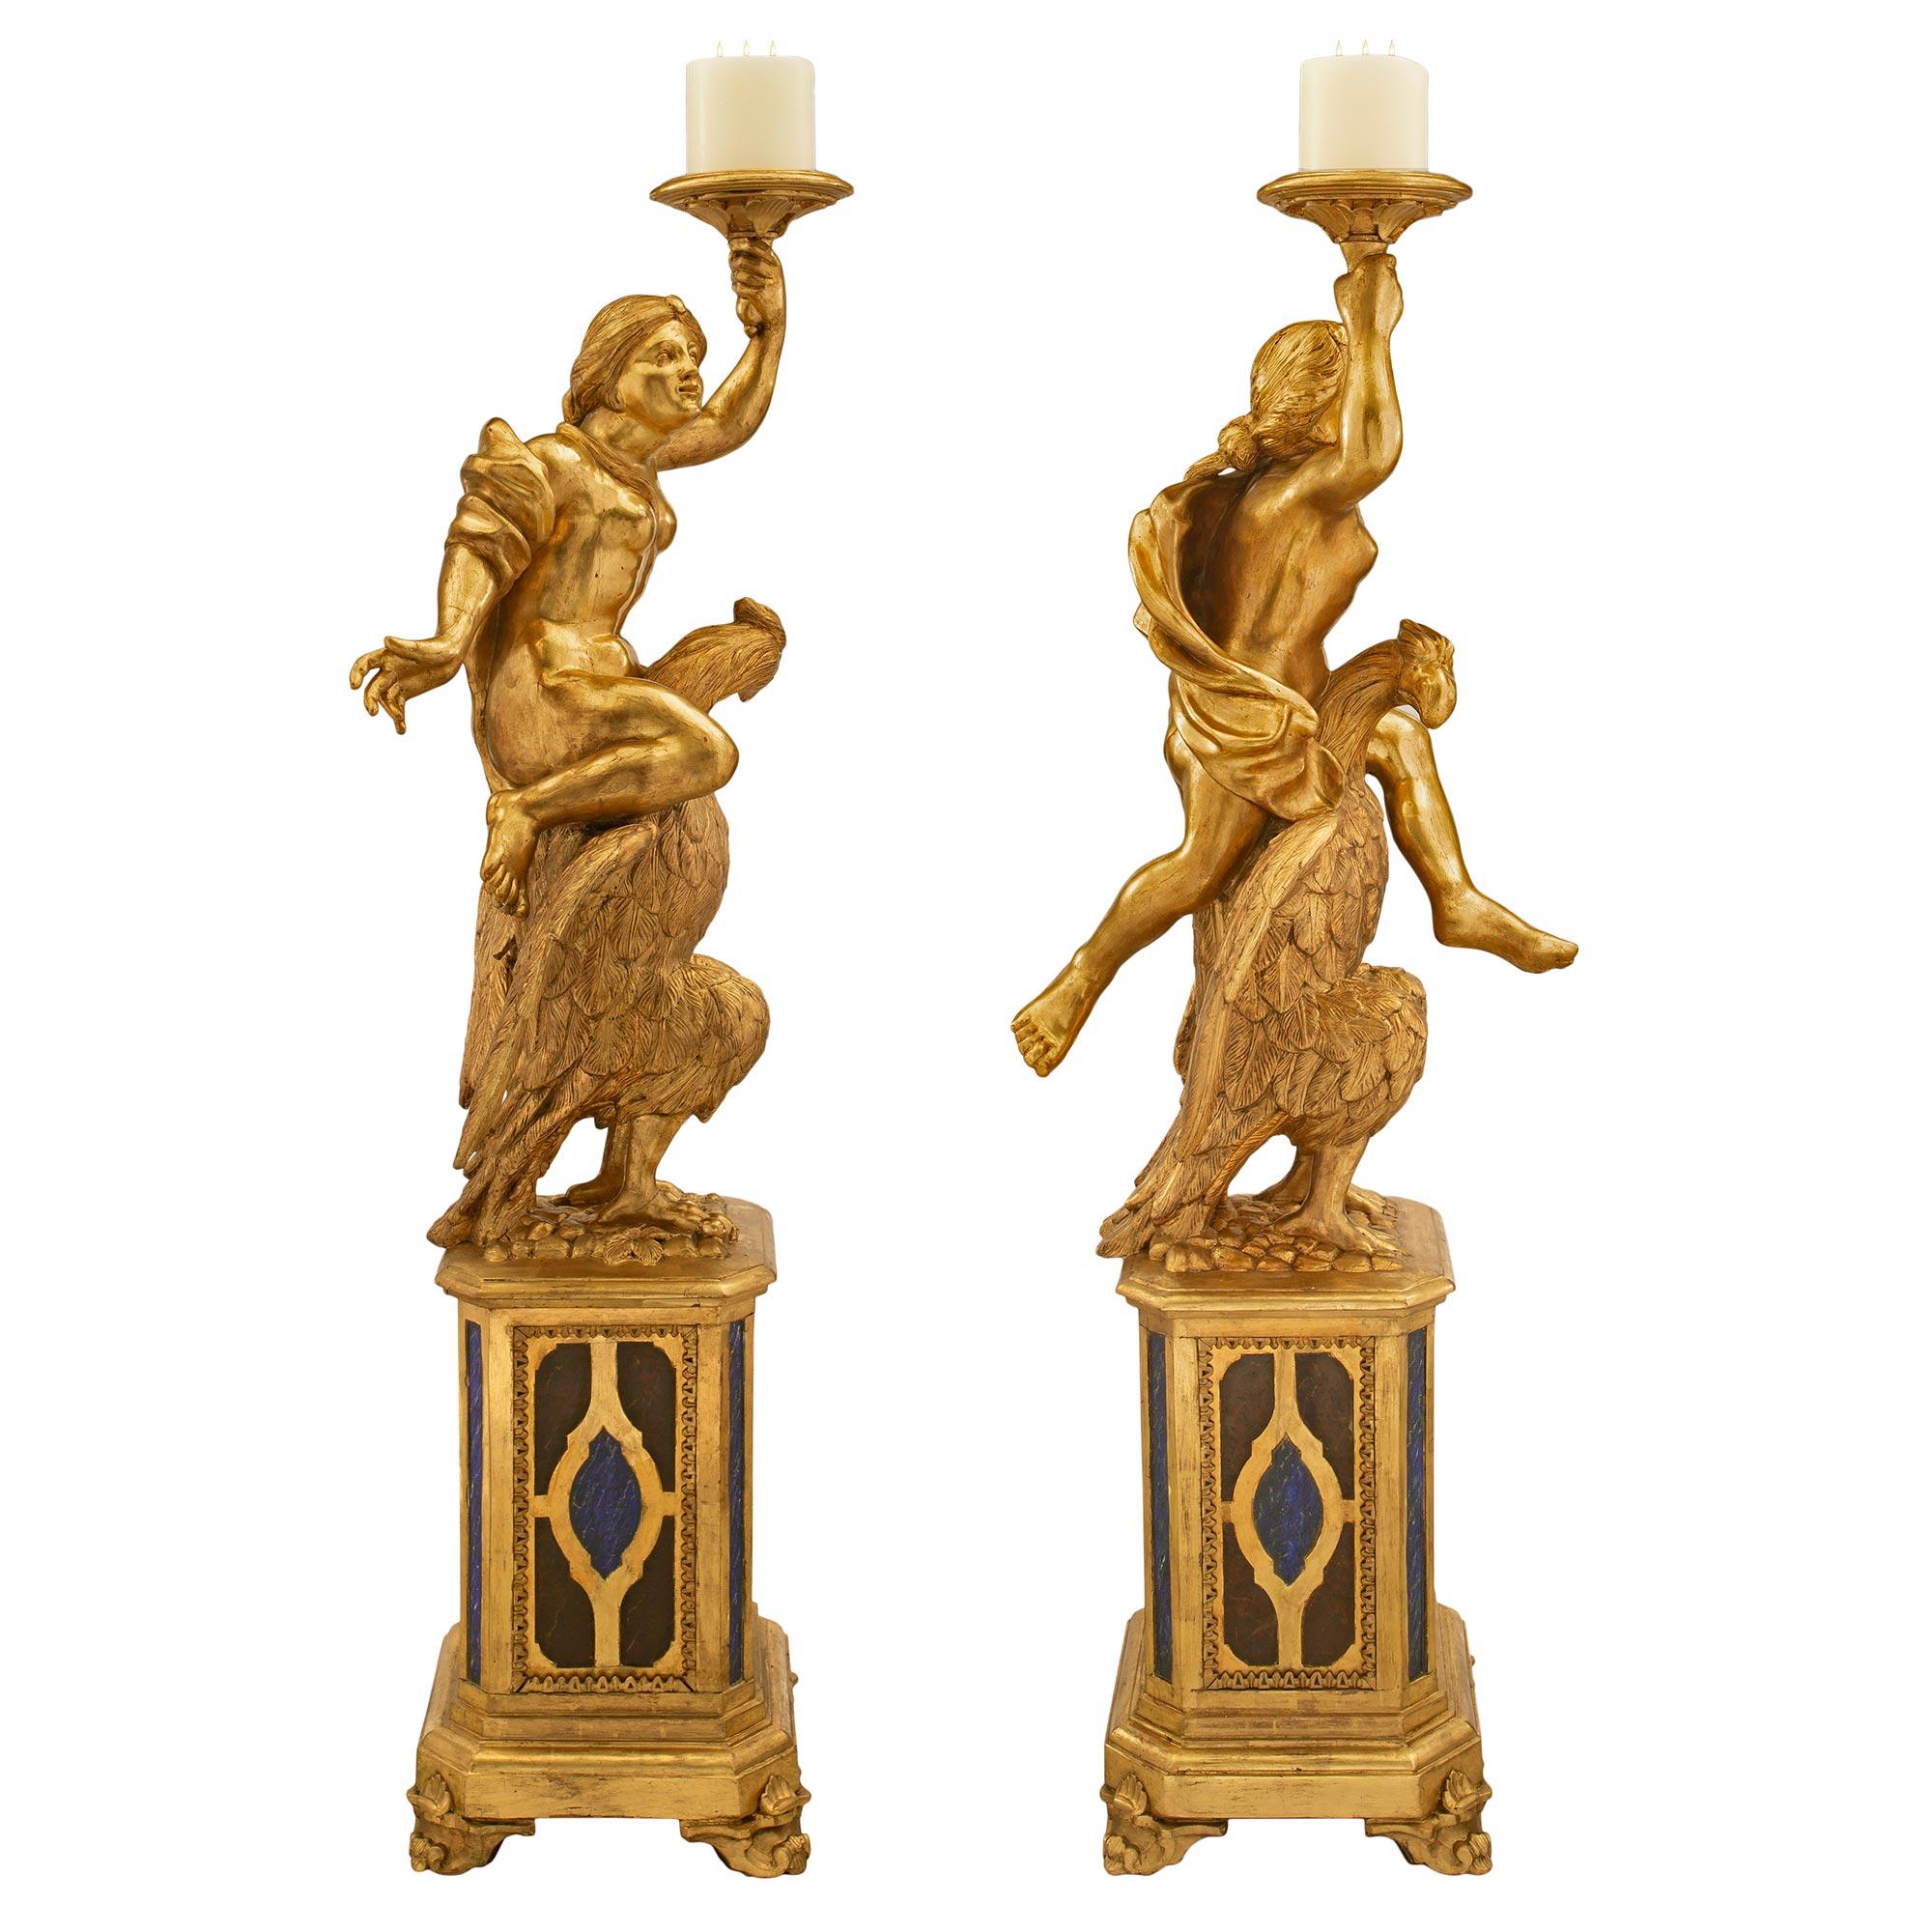 Pair of Italian 18th Century Giltwood and Faux Painted Baroque Torchières In Good Condition For Sale In West Palm Beach, FL